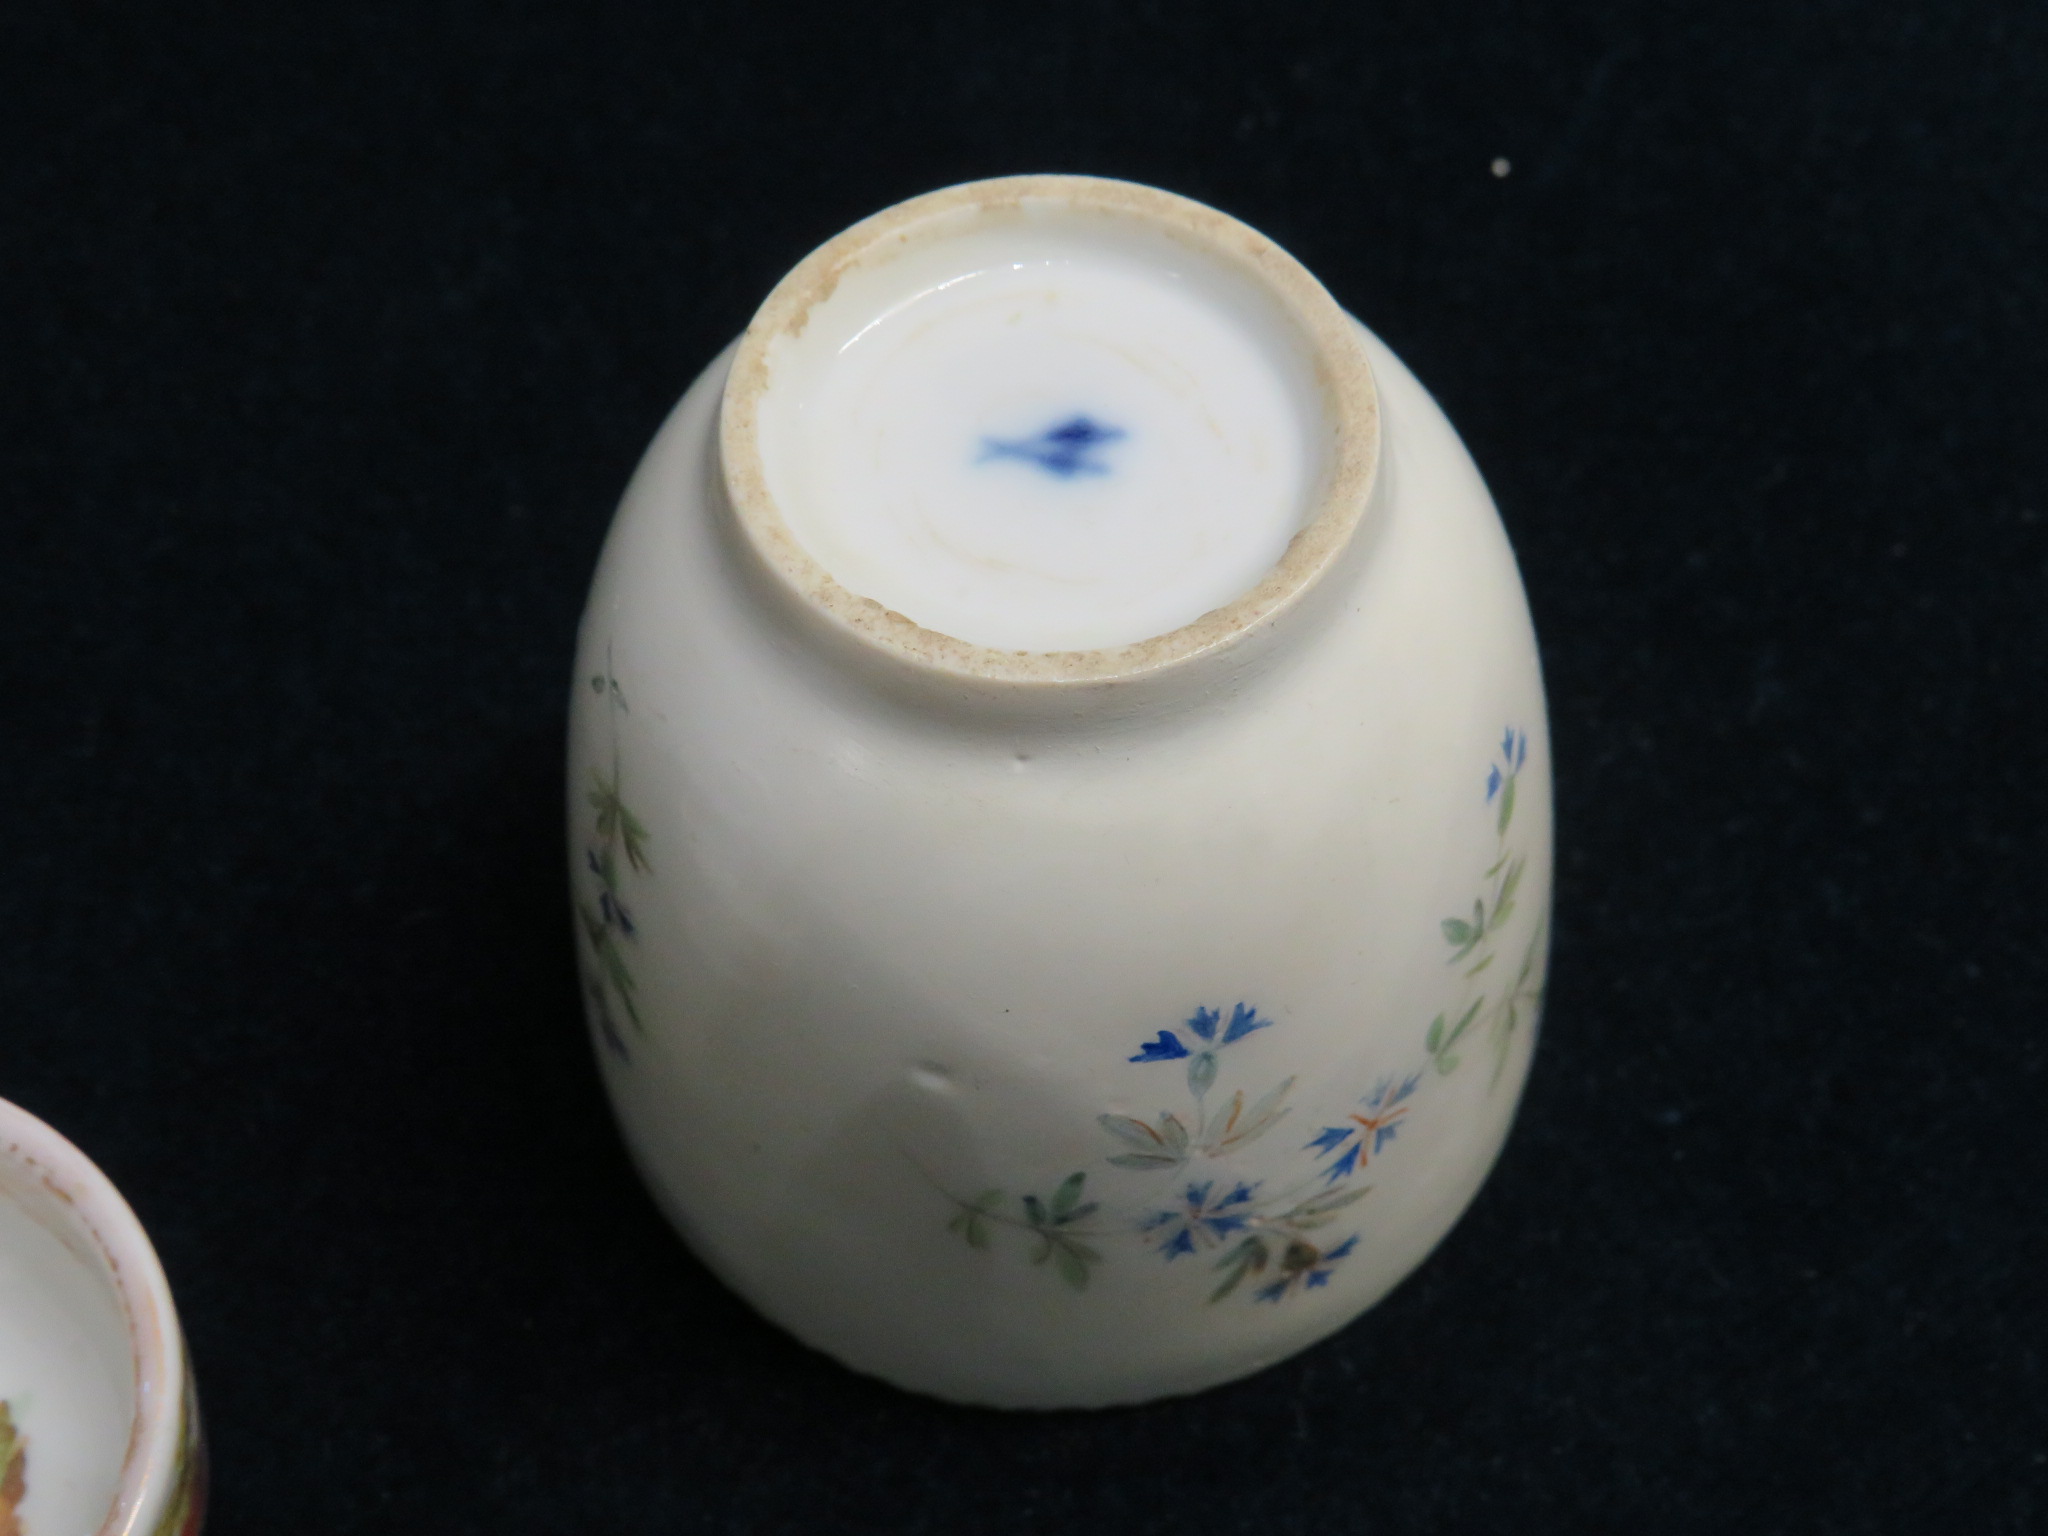 CONTINENTAL PORCELAIN SALT DECORATED WITH BIRDS, AND A TEACUP DECORATED WITH CORNFLOWERS, BOTH - Image 5 of 5